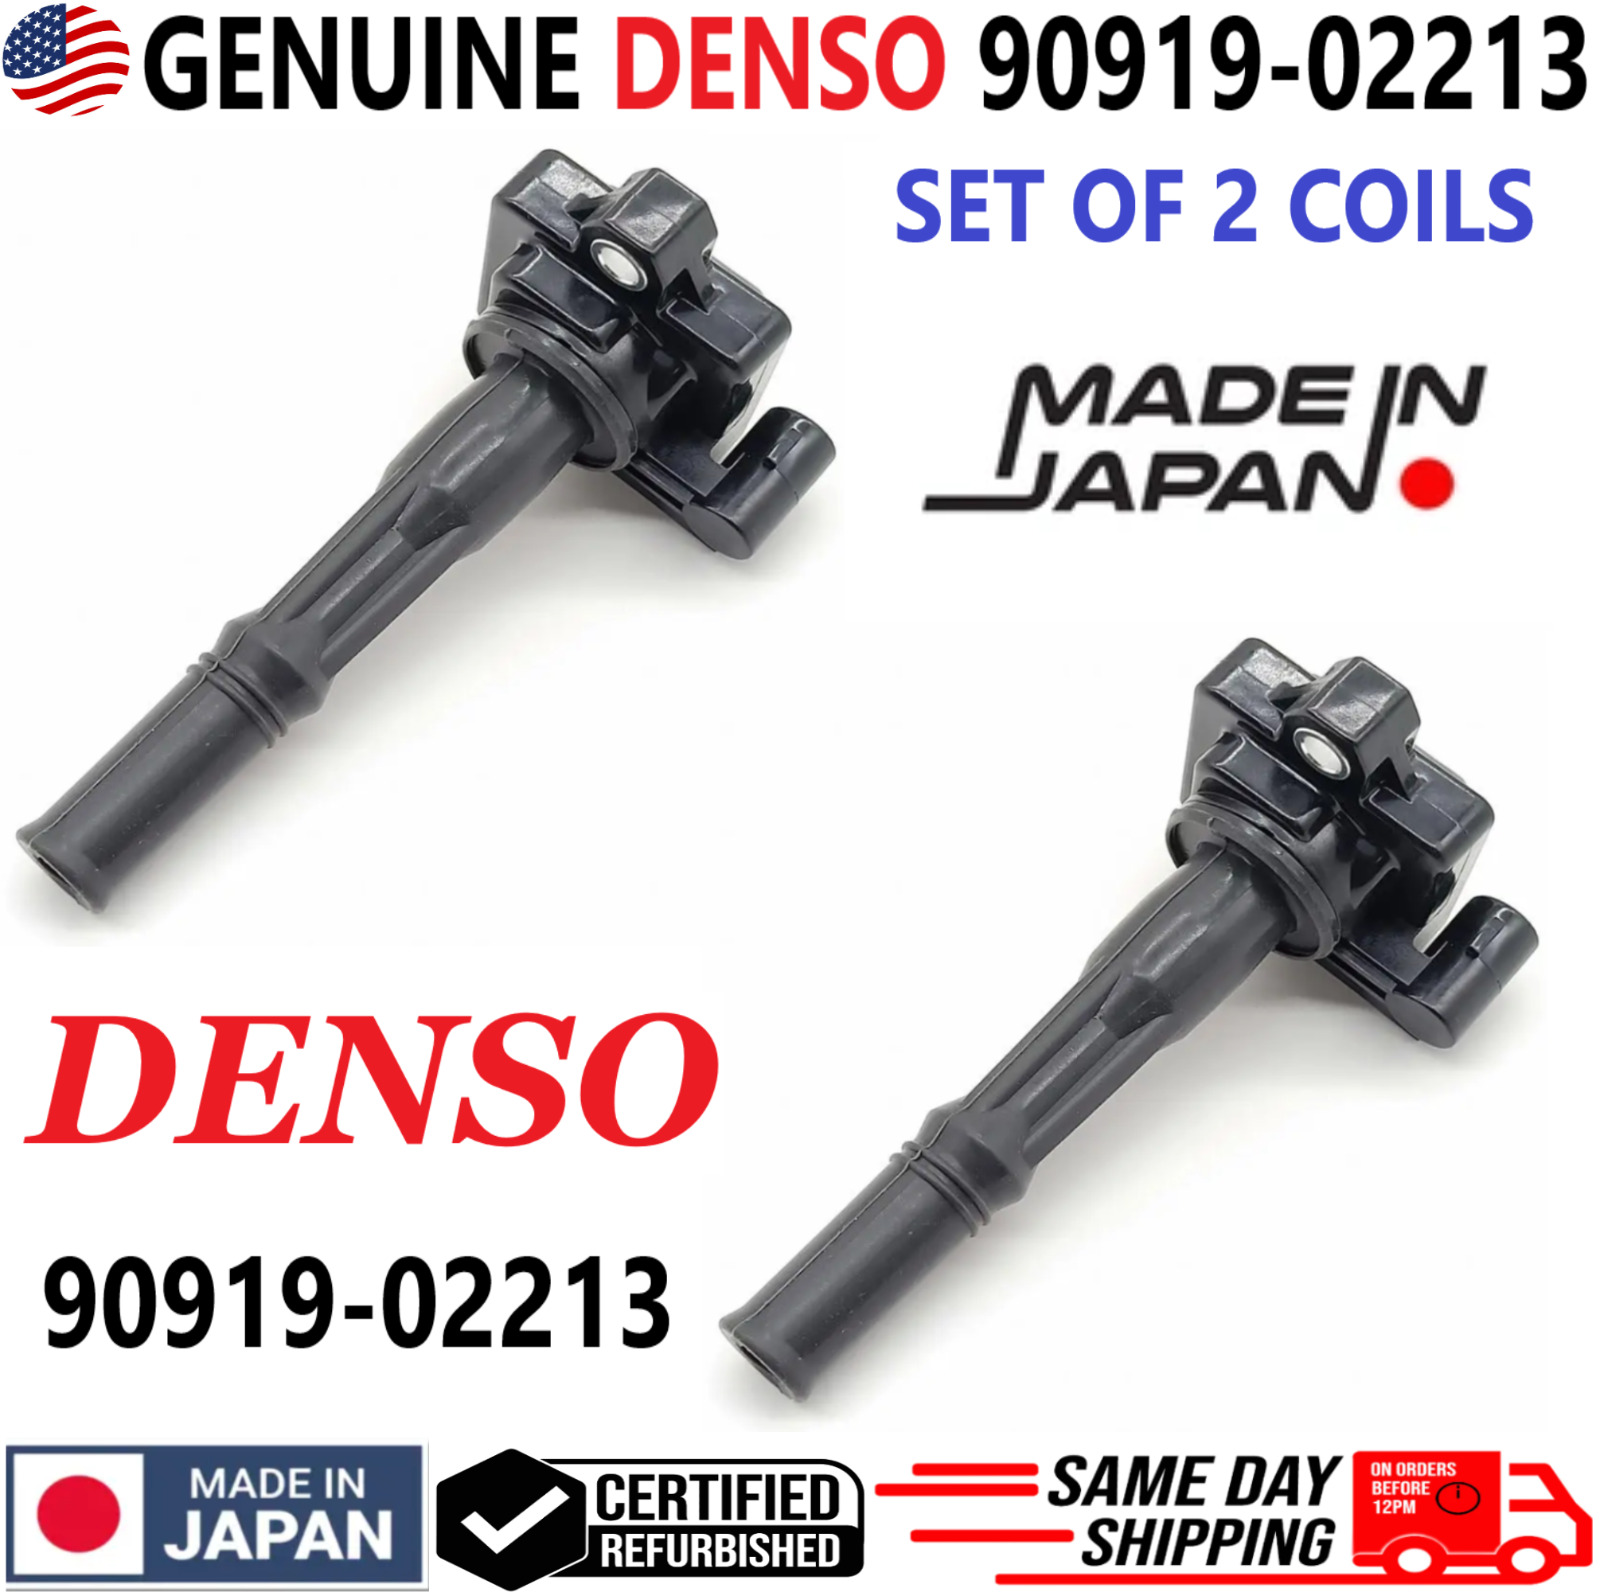 GENUINE DENSO x2 Ignition Coils For 1995-1999 Toyota Paseo & Tercel, 90919-02213